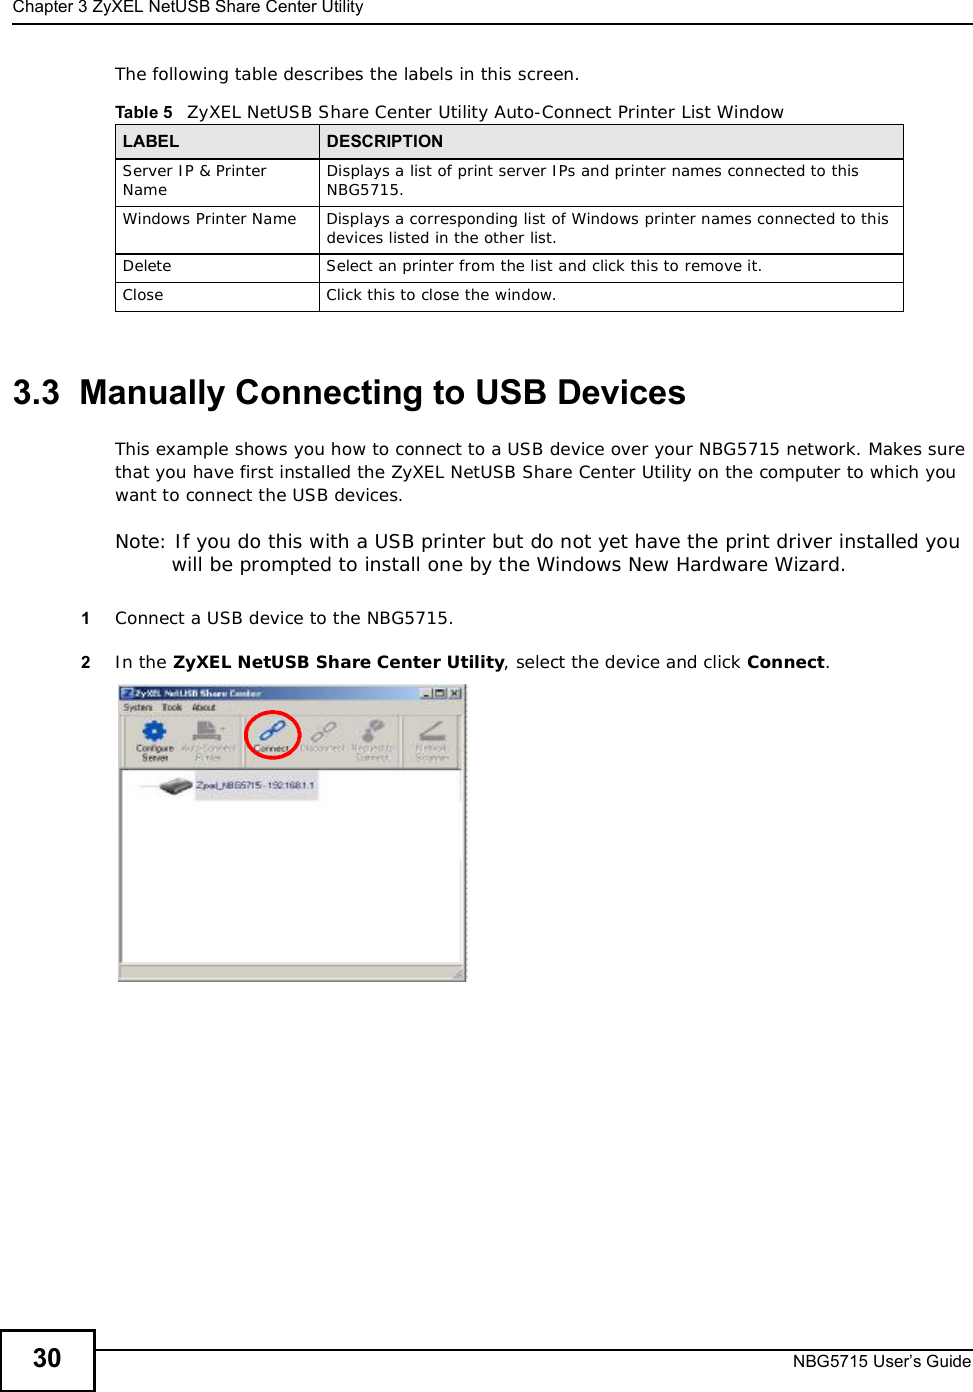 Chapter 3ZyXEL NetUSB Share Center UtilityNBG5715 User’s Guide30The following table describes the labels in this screen.3.3  Manually Connecting to USB DevicesThis example shows you how to connect to a USB device over your NBG5715 network. Makes sure that you have first installed the ZyXEL NetUSB Share Center Utility on the computer to which you want to connect the USB devices.Note: If you do this with a USB printer but do not yet have the print driver installed you will be prompted to install one by the Windows New Hardware Wizard.1Connect a USB device to the NBG5715.2In the ZyXEL NetUSB Share Center Utility, select the device and click Connect.Table 5   ZyXEL NetUSB Share Center Utility Auto-Connect Printer List WindowLABEL DESCRIPTIONServer IP &amp; Printer Name Displays a list of print server IPs and printer names connected to this NBG5715.Windows Printer NameDisplays a corresponding list of Windows printer names connected to this devices listed in the other list.DeleteSelect an printer from the list and click this to remove it.CloseClick this to close the window.